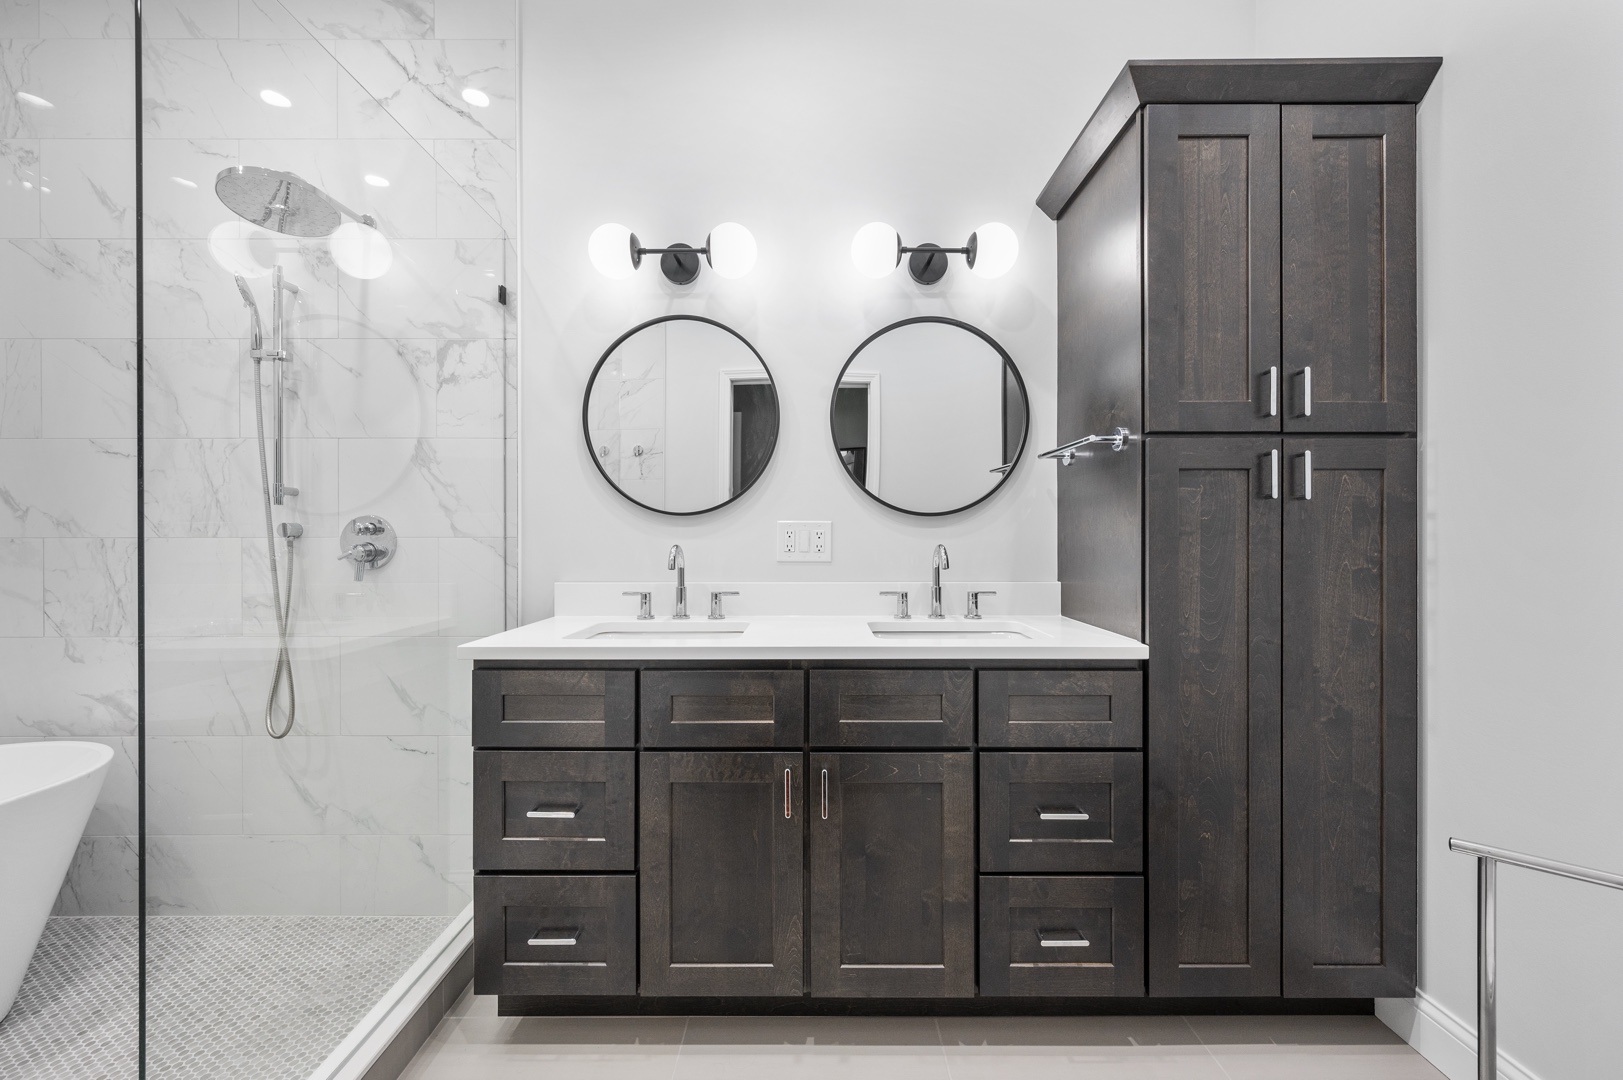 Image of a full bathroom remodel in Chicago with double round mirrors and double ivory sink.